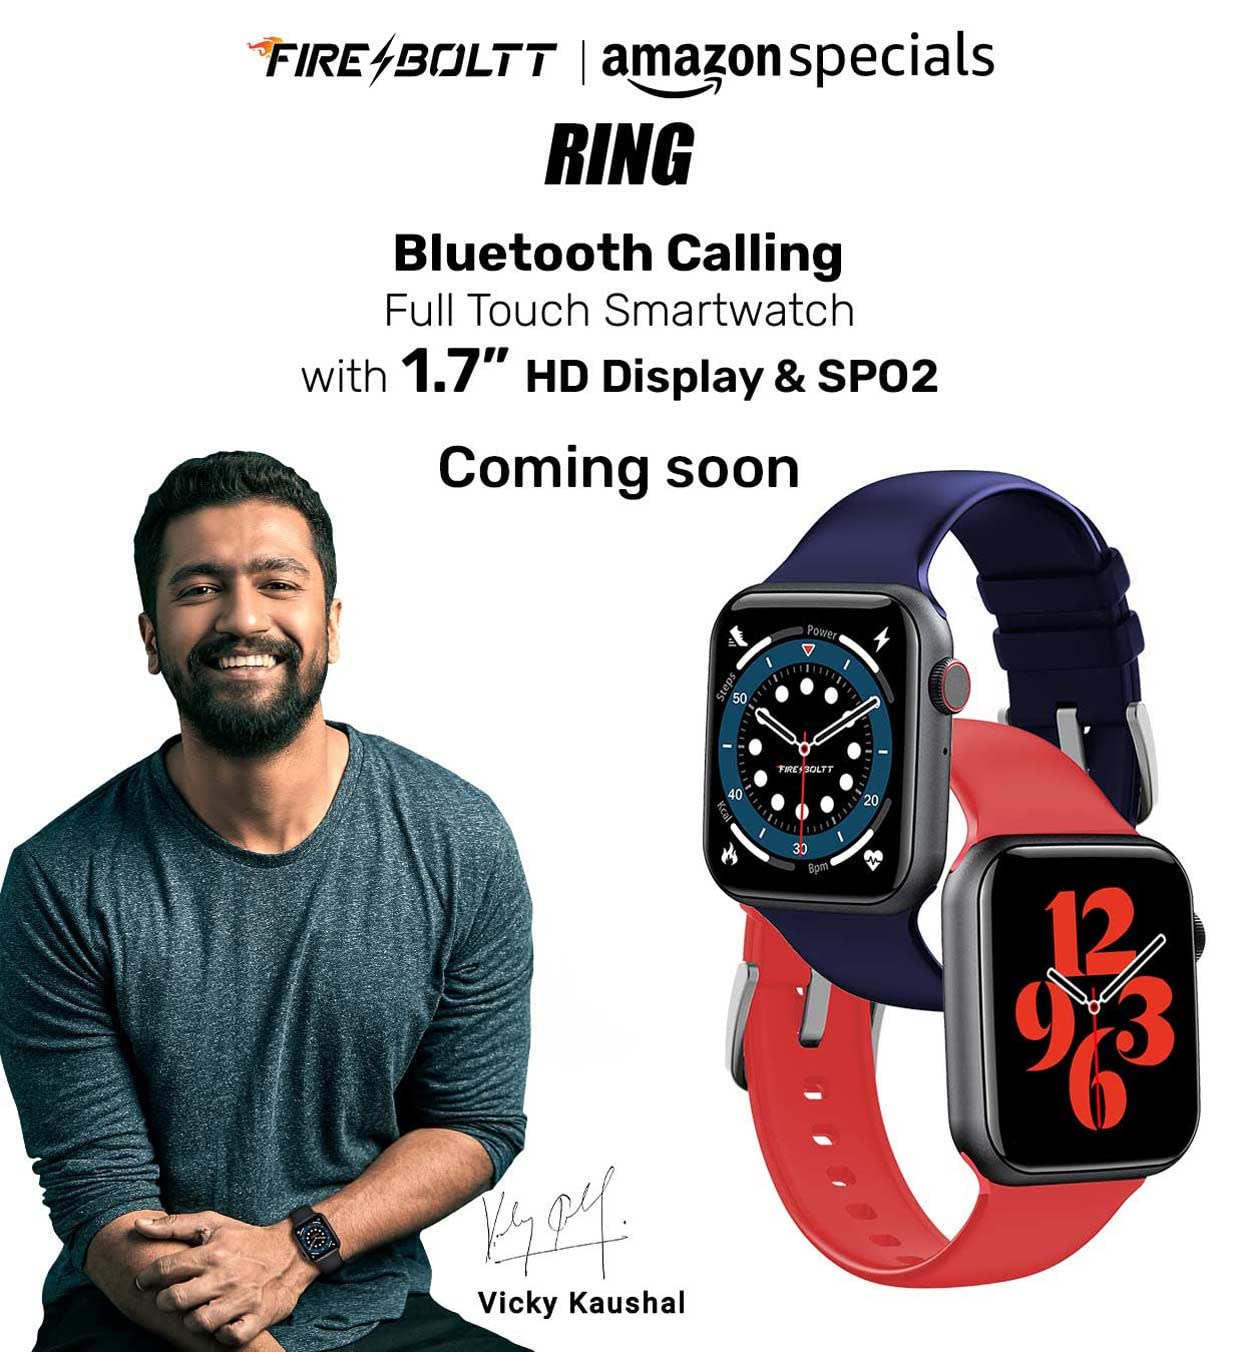 Fire Boltt Ring 3 Smartwatch Price in India 2024, Full Specs & Review |  Smartprix